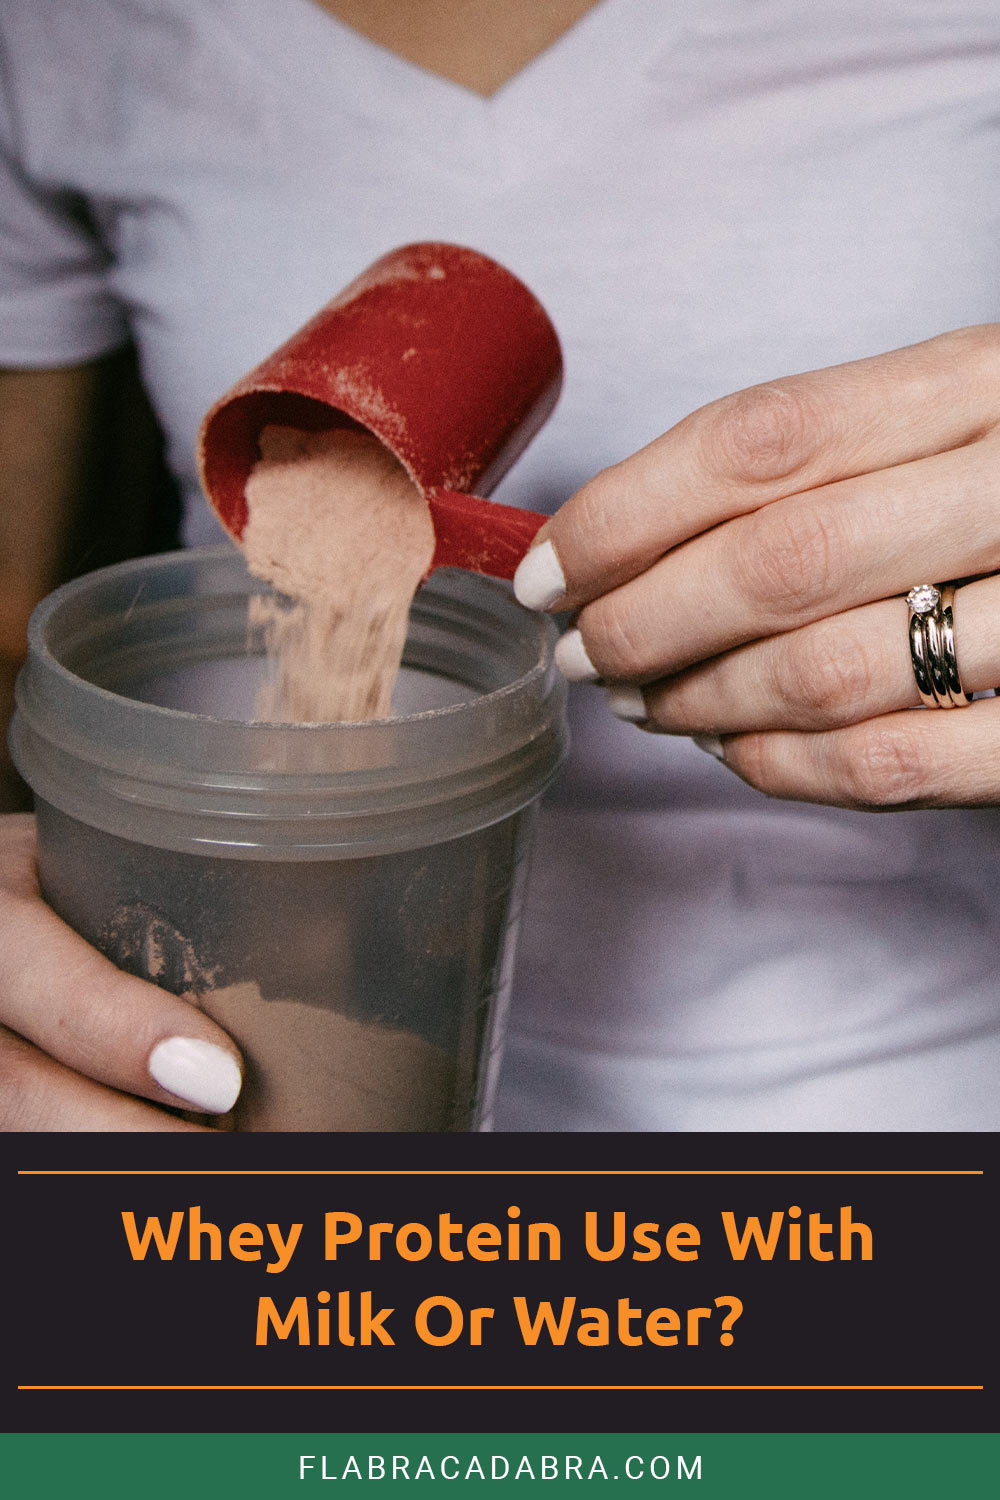 Woman pouring whey protein powder in a cup - Whey Protein Use With Milk Or Water?